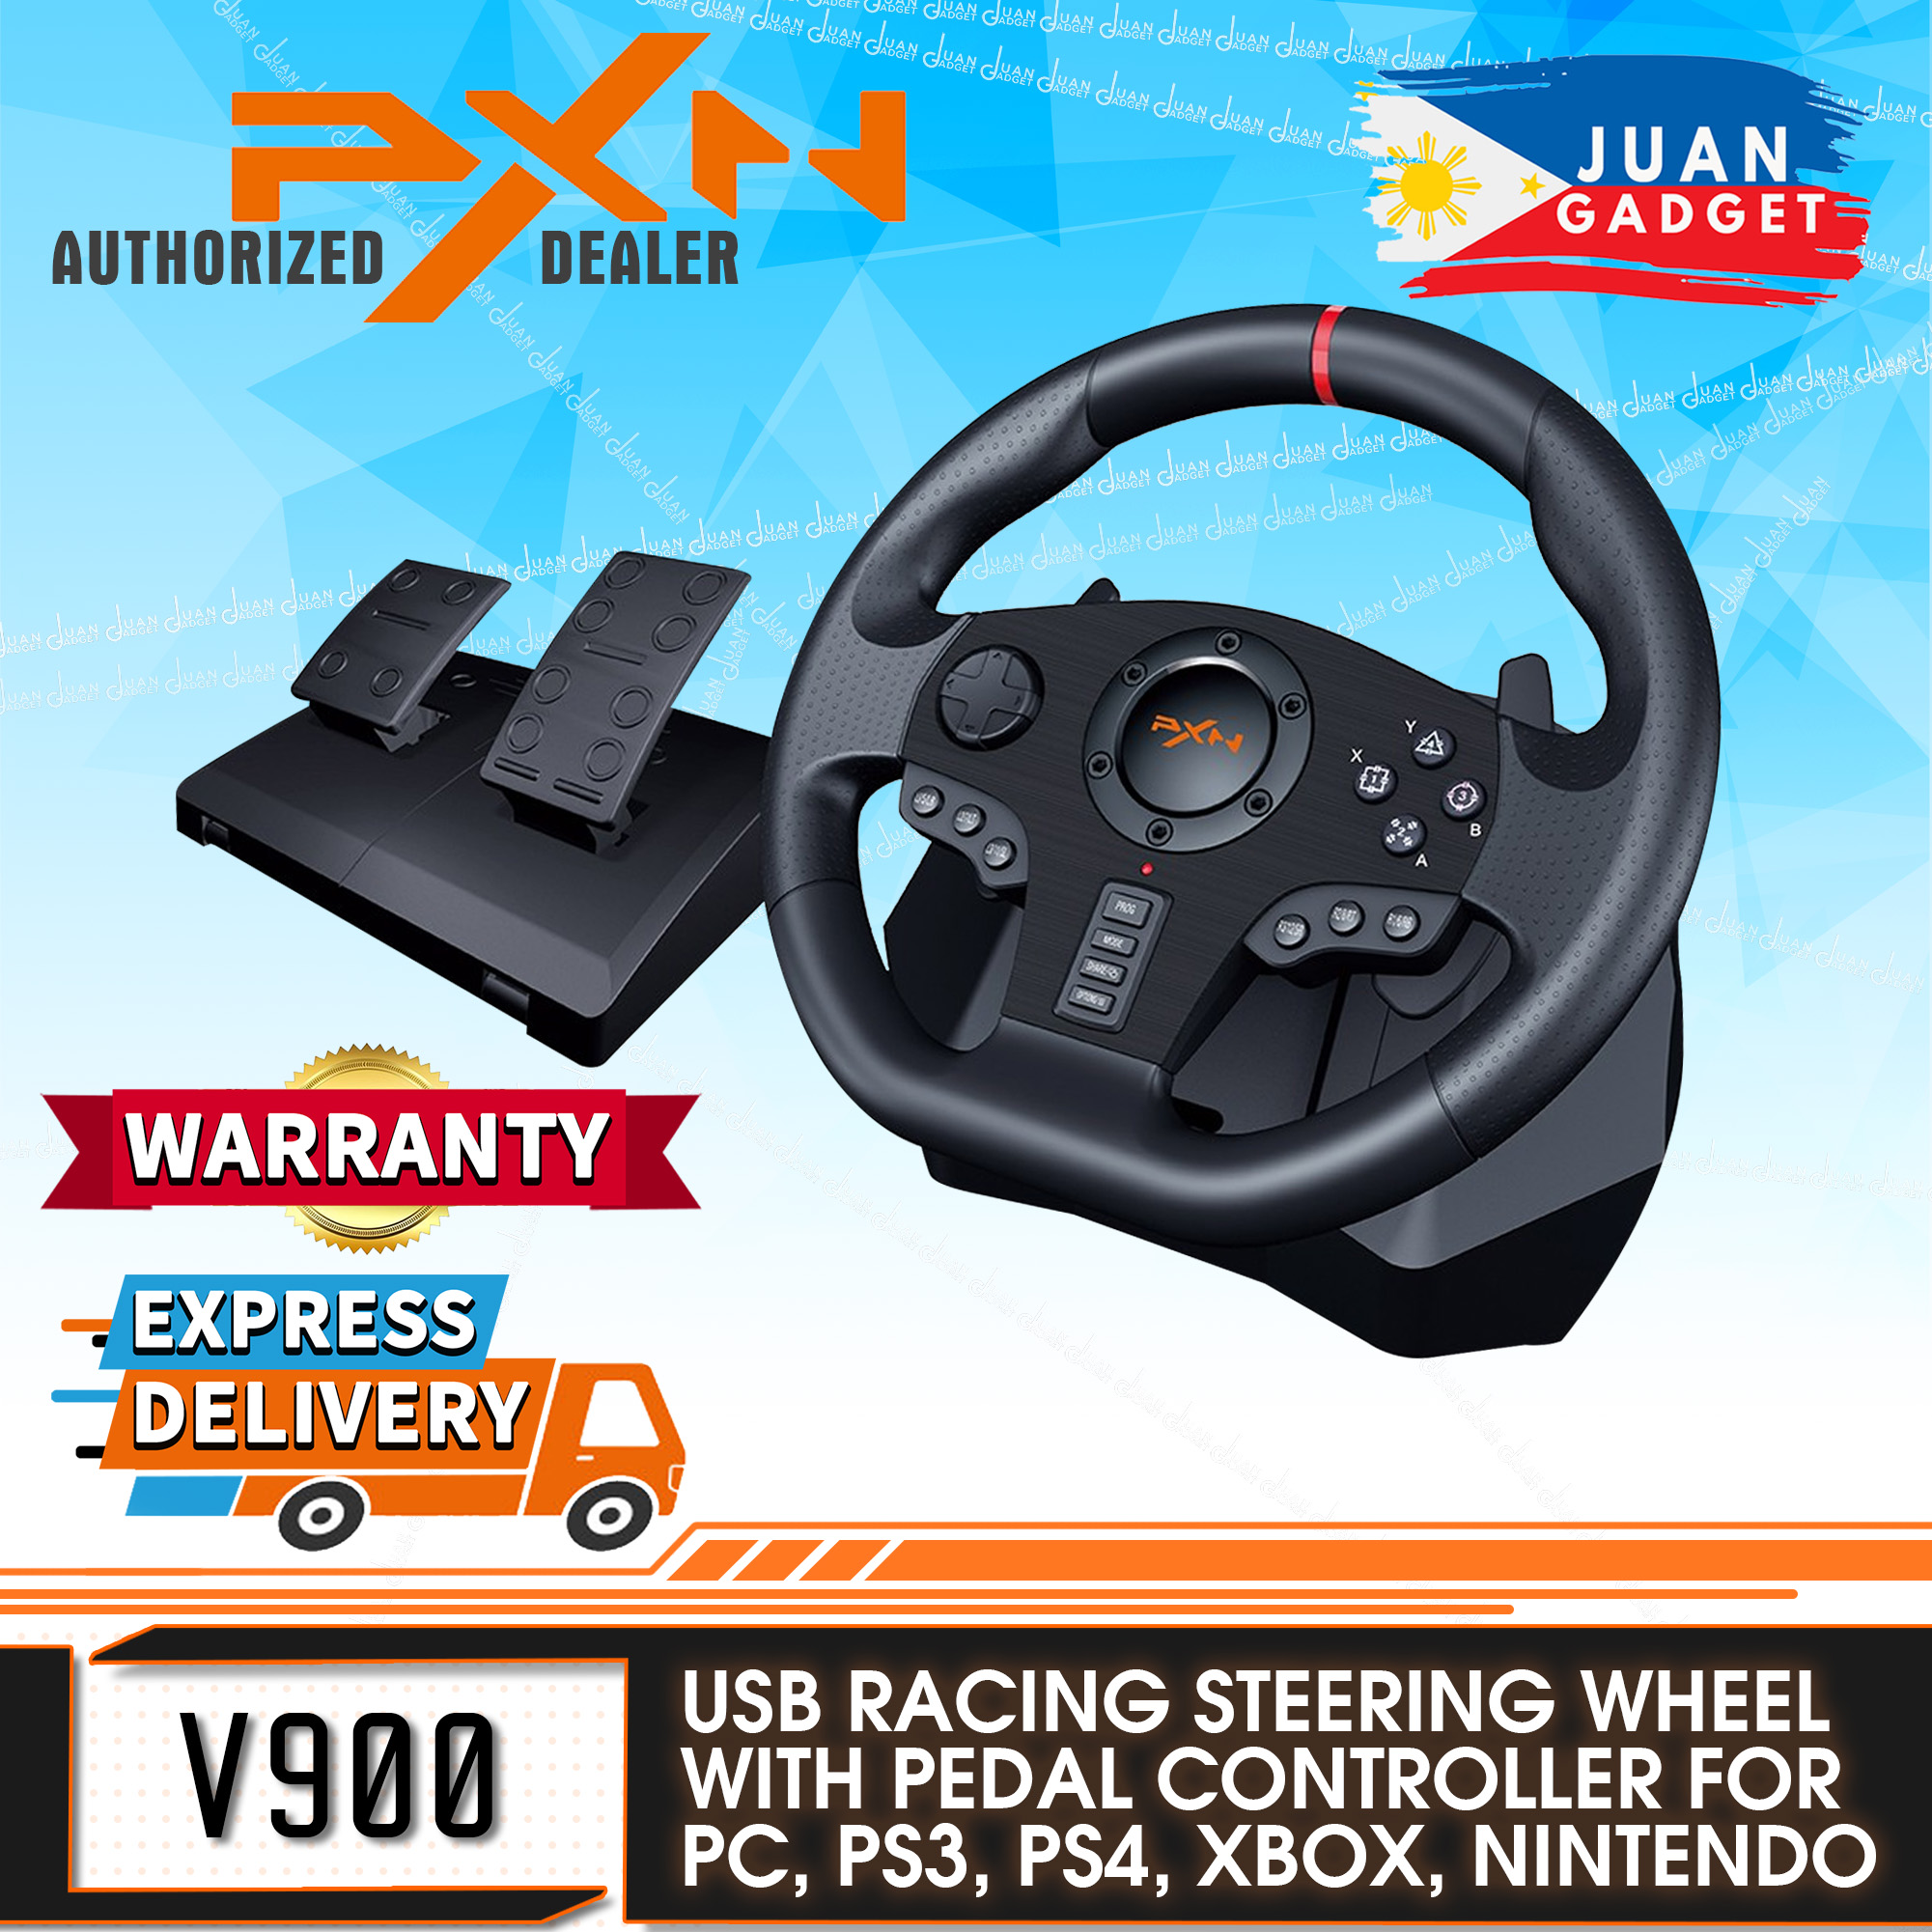 PXN V9 PC Steering Wheel Usb Car Sim racing wheel 270 900 Degree gaming steering wheel with Pedals and Shifter set for PS4 PS3 xbox one xbox seriesX S